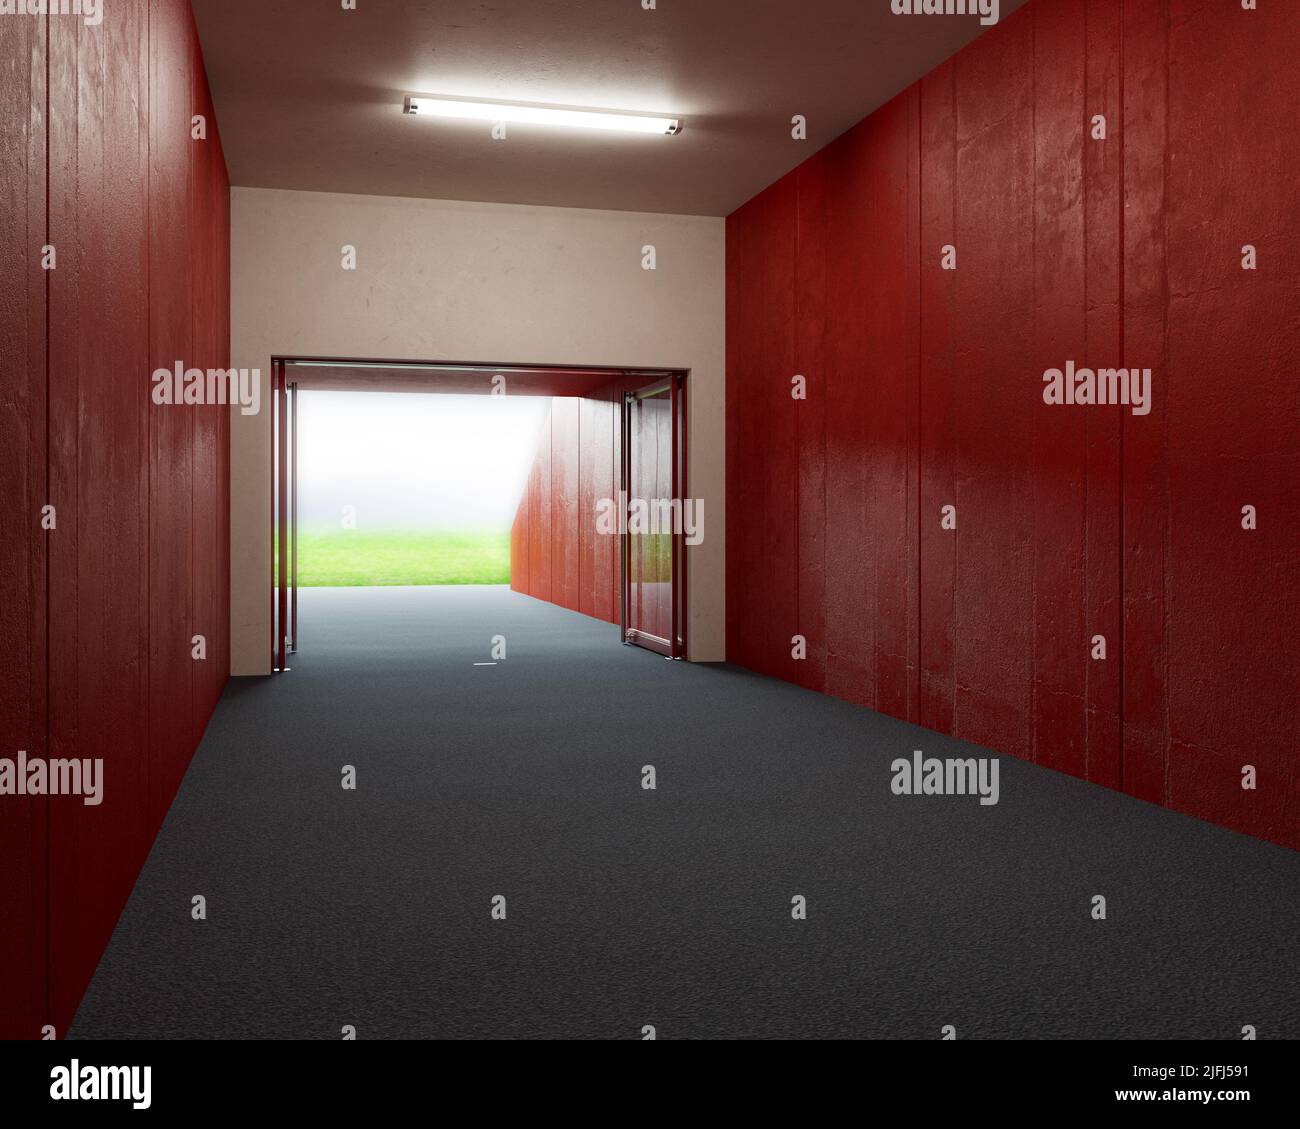 A look down a predominantly red stadium sports corridor through open glass doors to a lit arena in the distance - 3D render Stock Photo